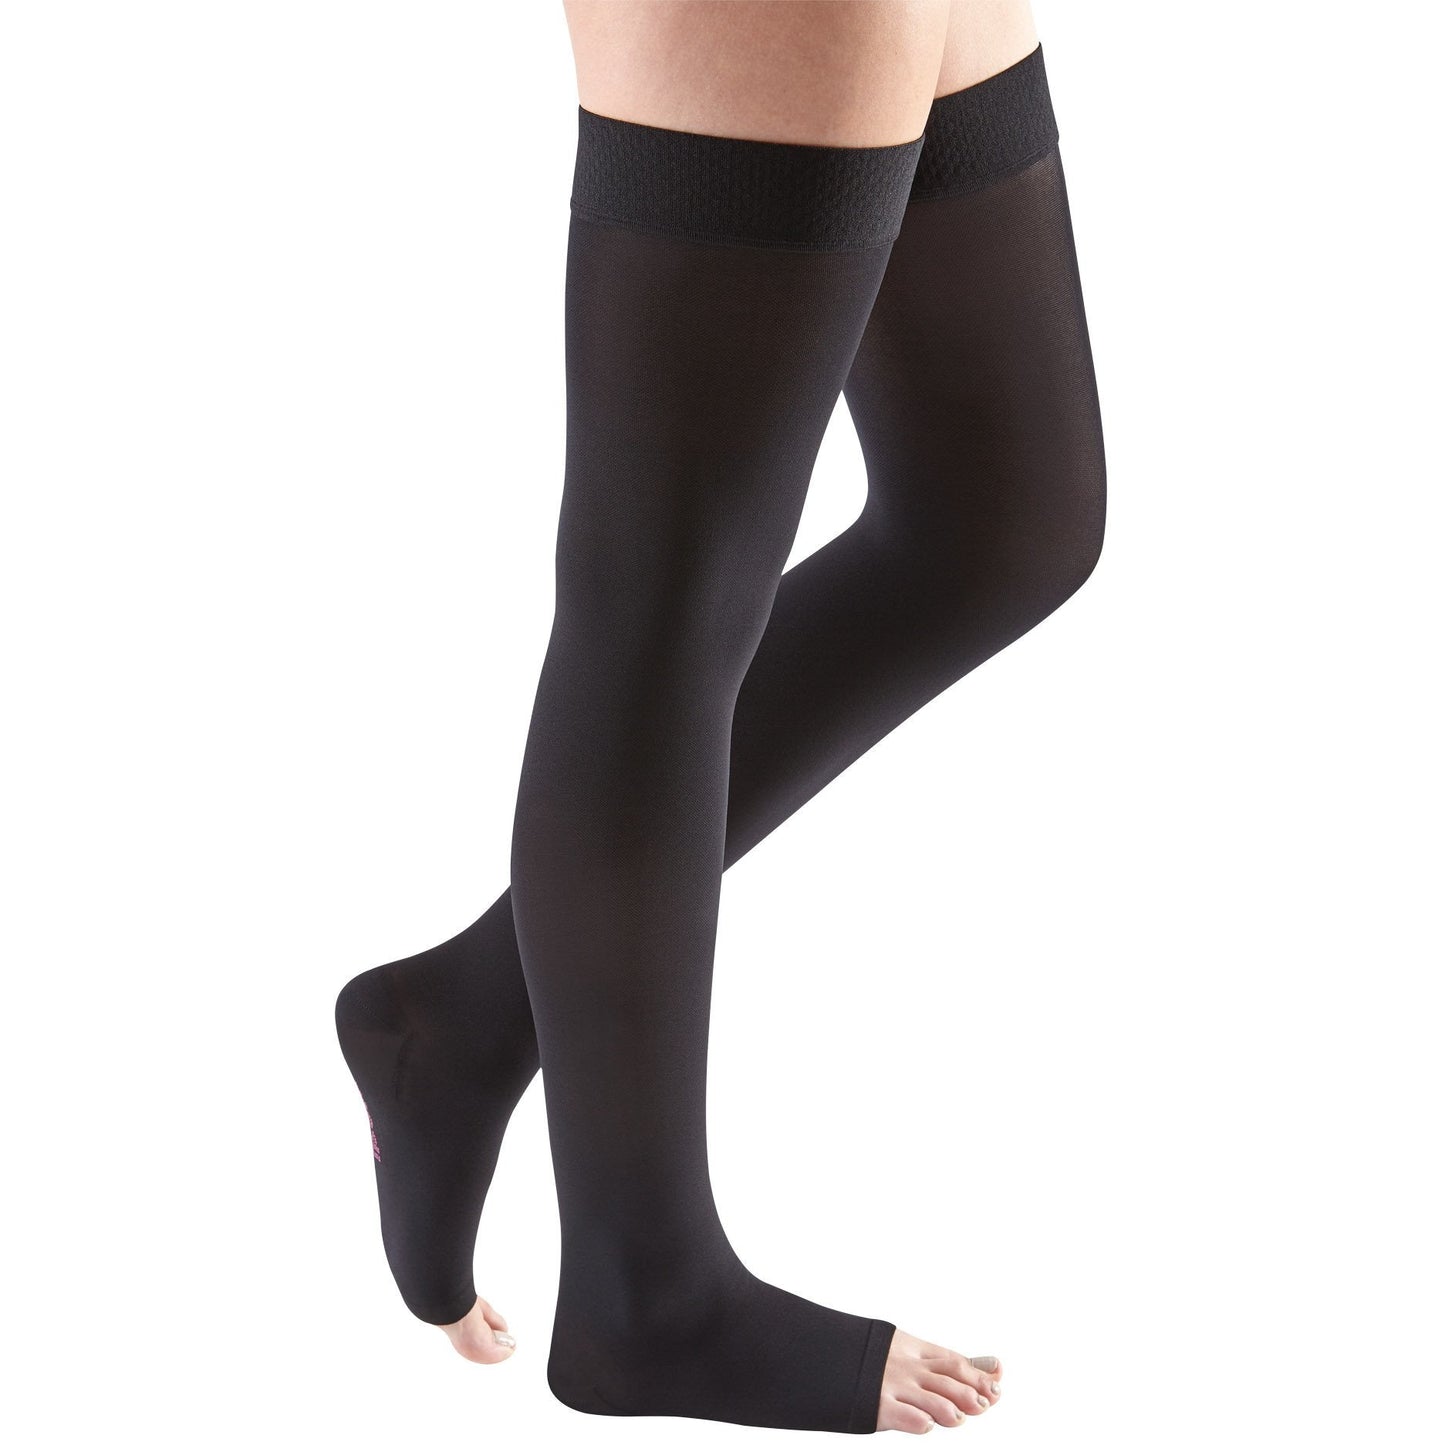 Mediven Comfort Thigh High 20-30 mmHg, Open Toe w/ Beaded Silicone Top Band [OVERSTOCK]